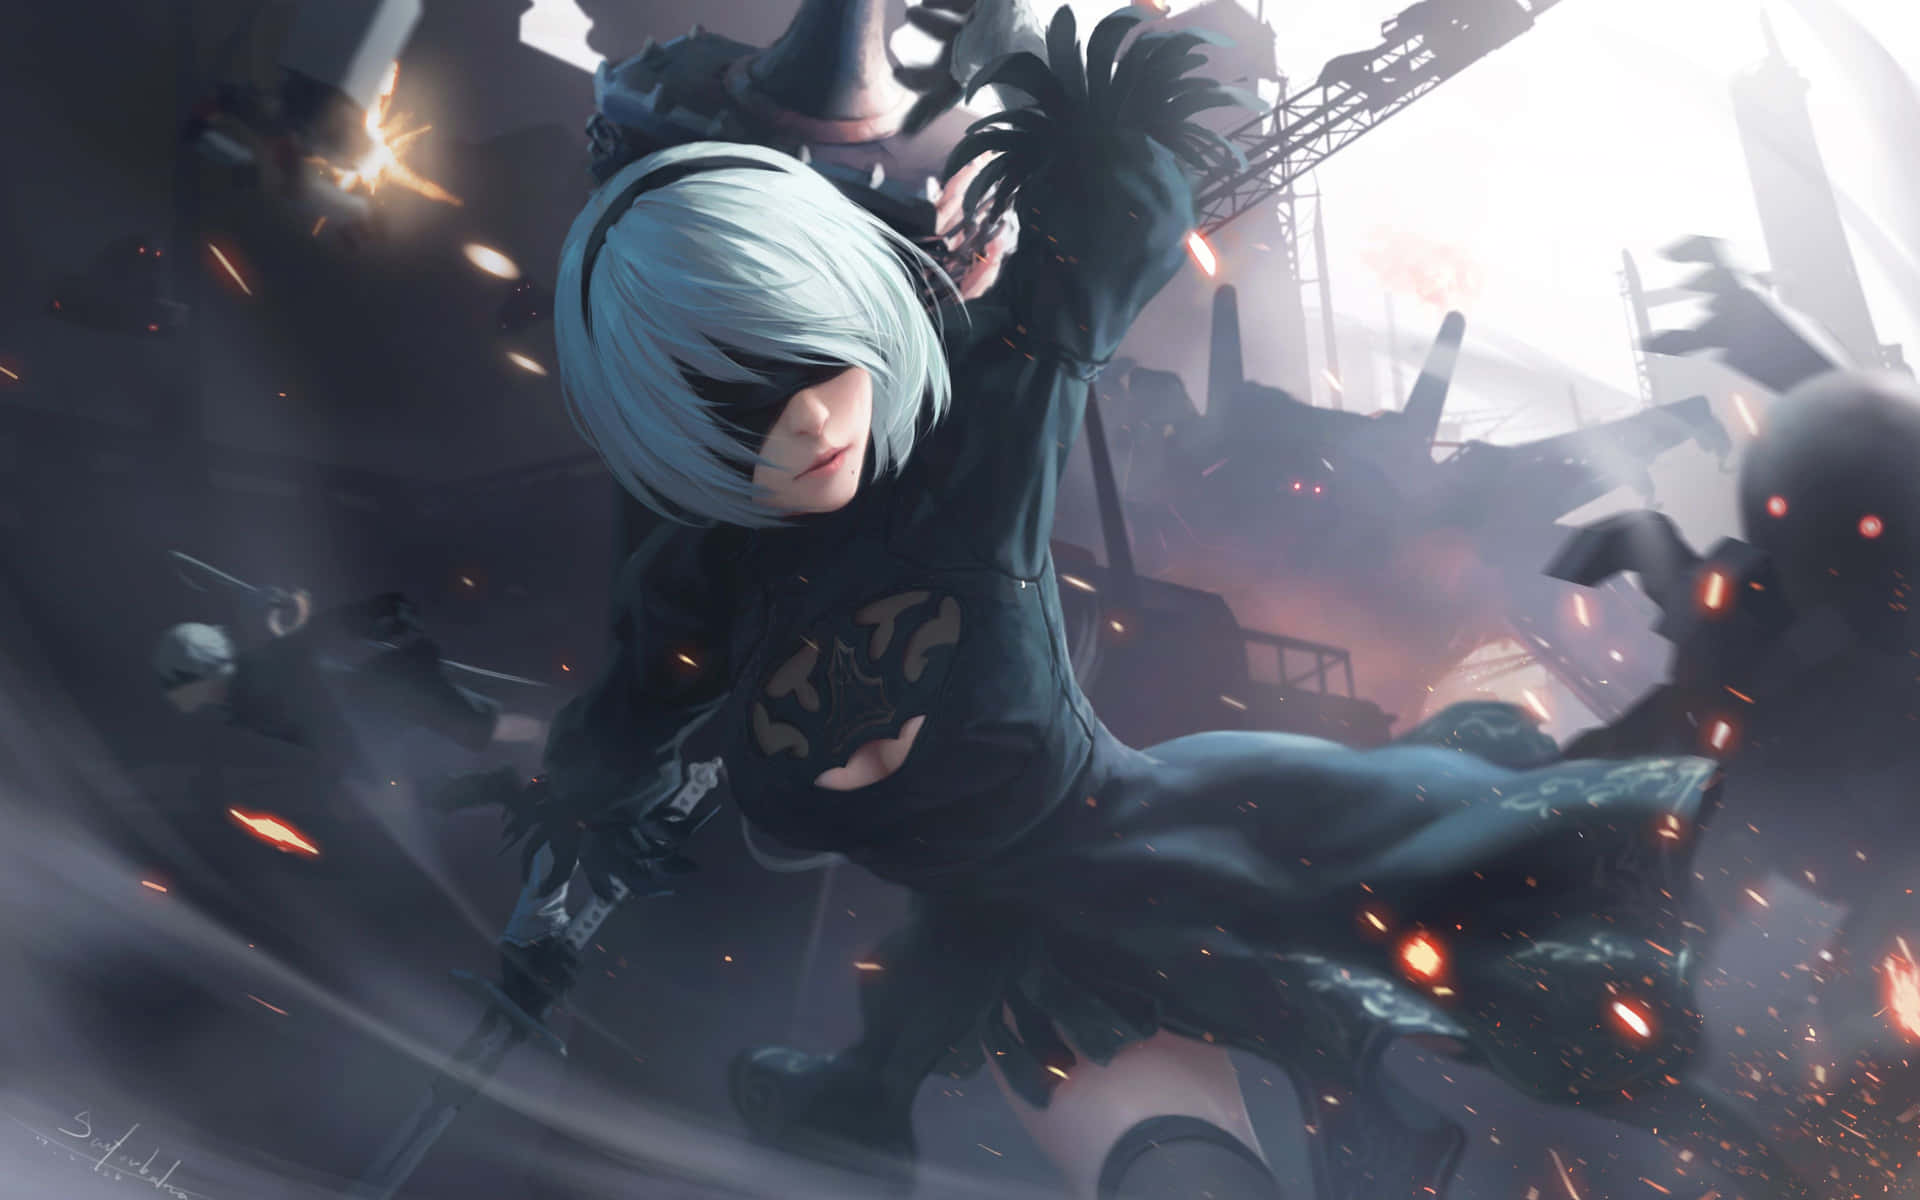 2B, a compelling heroine from the game NieR: Automata